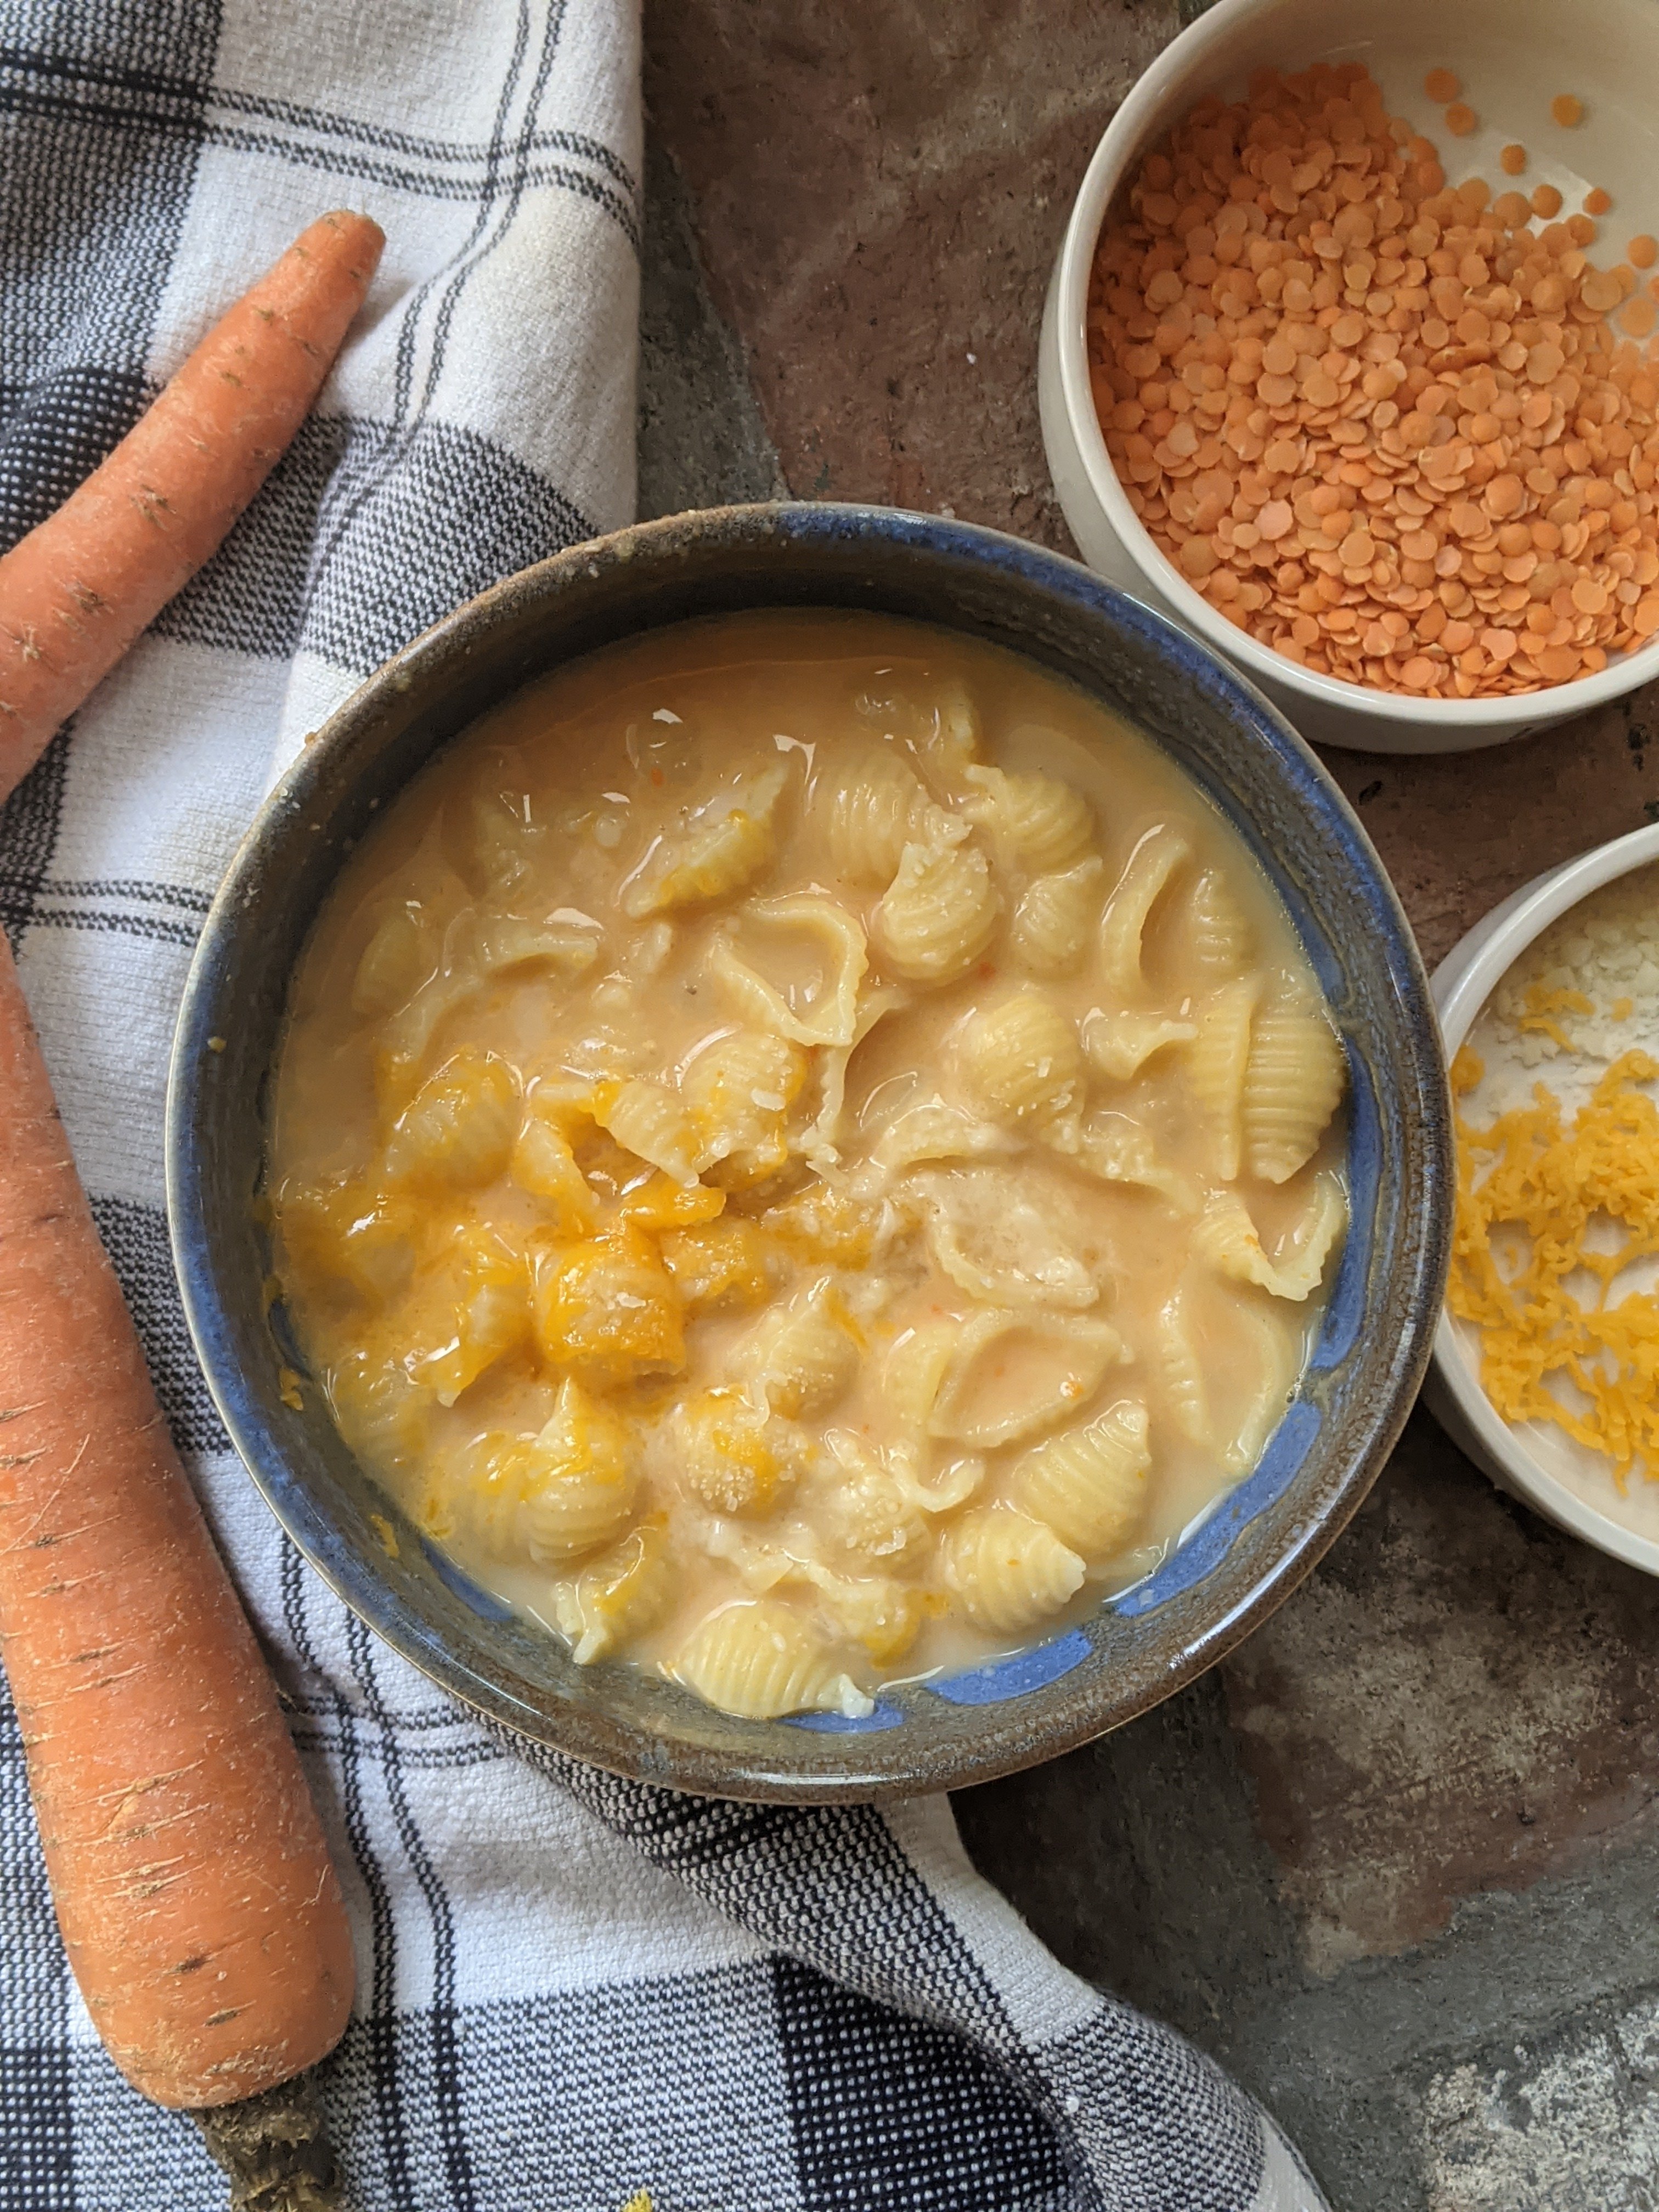 macaroni and cheese with red lentils soup recipe healthy vegan option vegetarian gluten free high protein lunches for work school or home